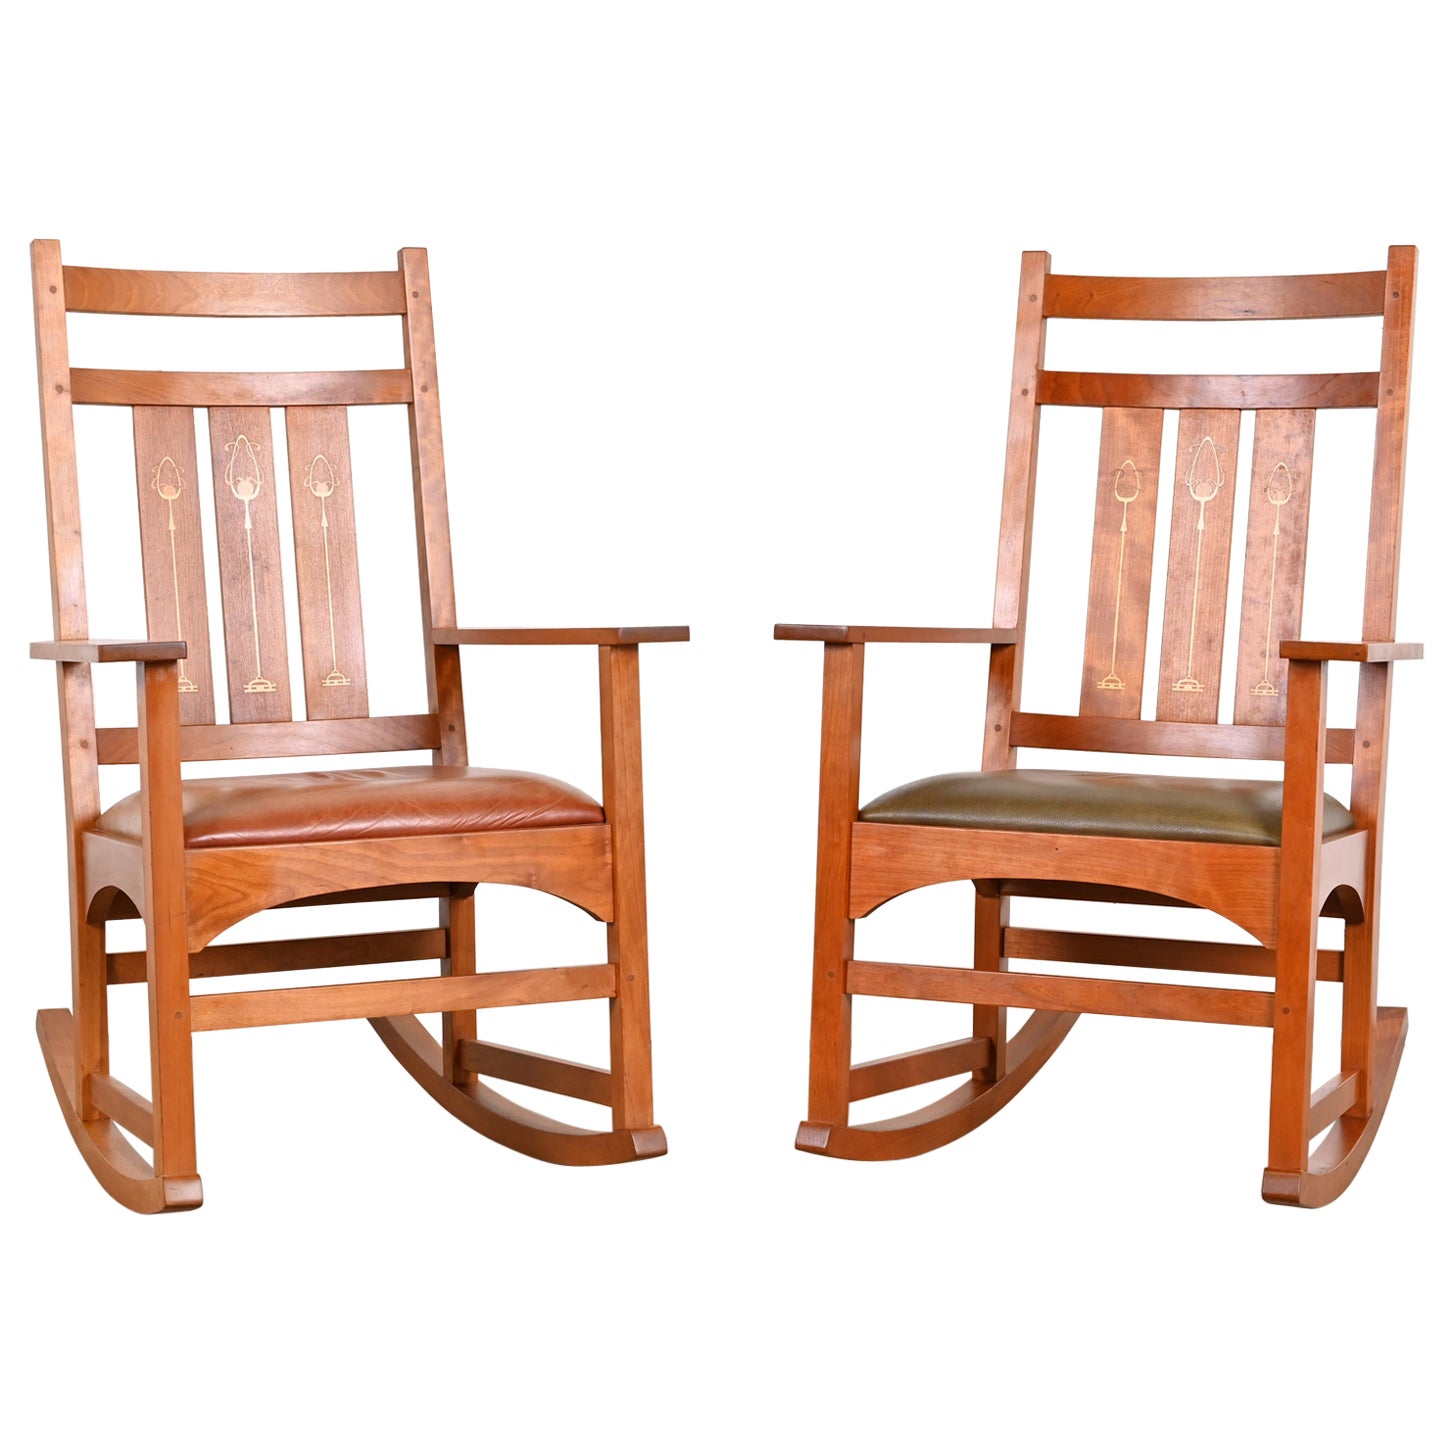 Stickley Harvey Ellis Collection Inlaid Cherry Wood Arts & Crafts Rocking Chairs